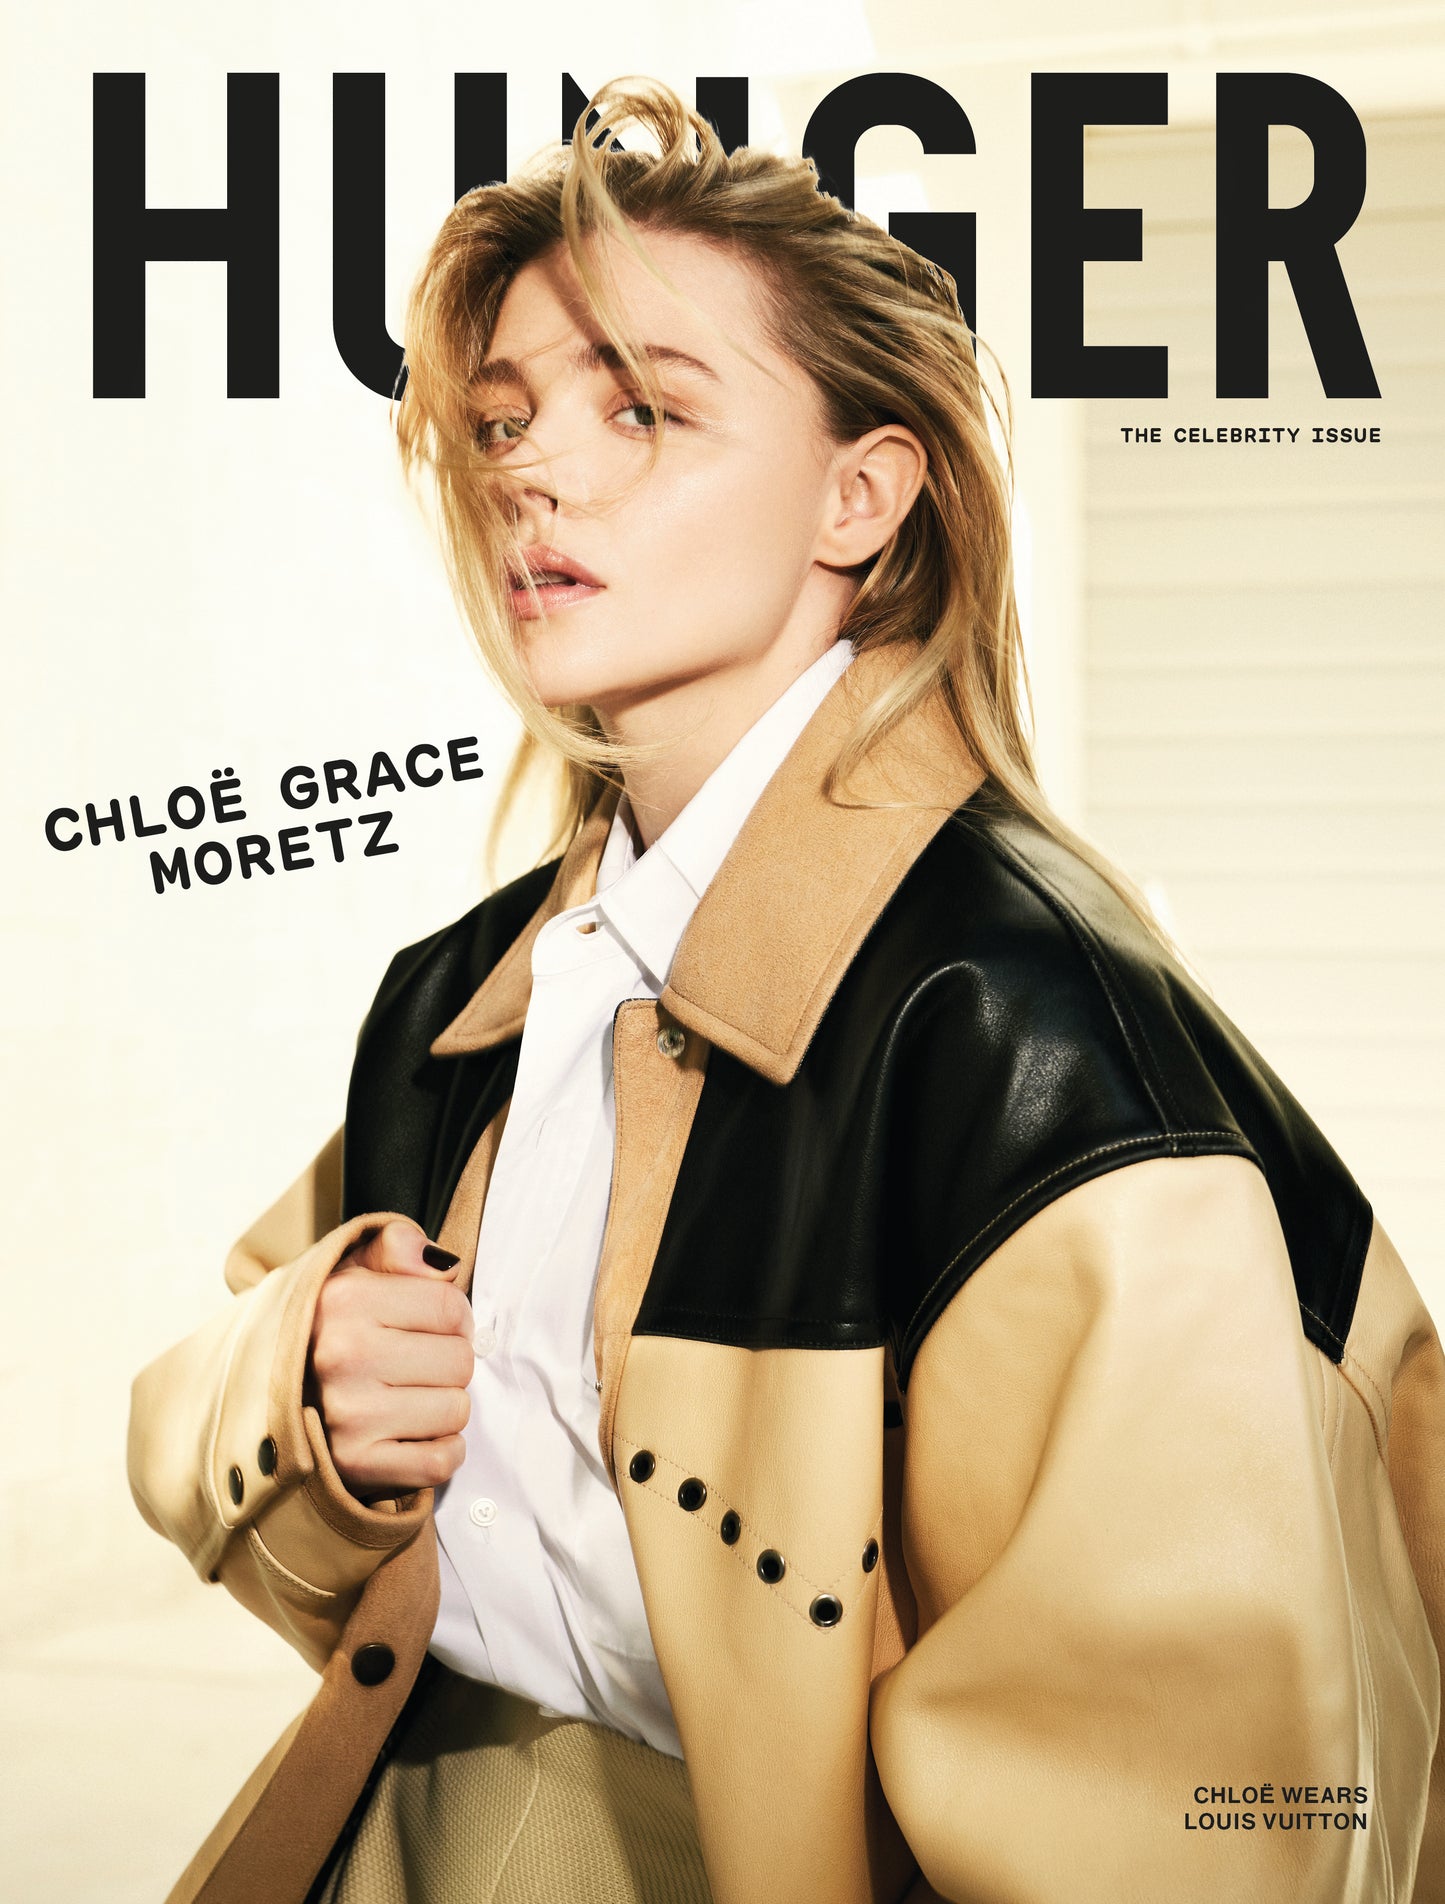 Chloe Grace Moretz covers The Celebrity issue in Louis Vuitton